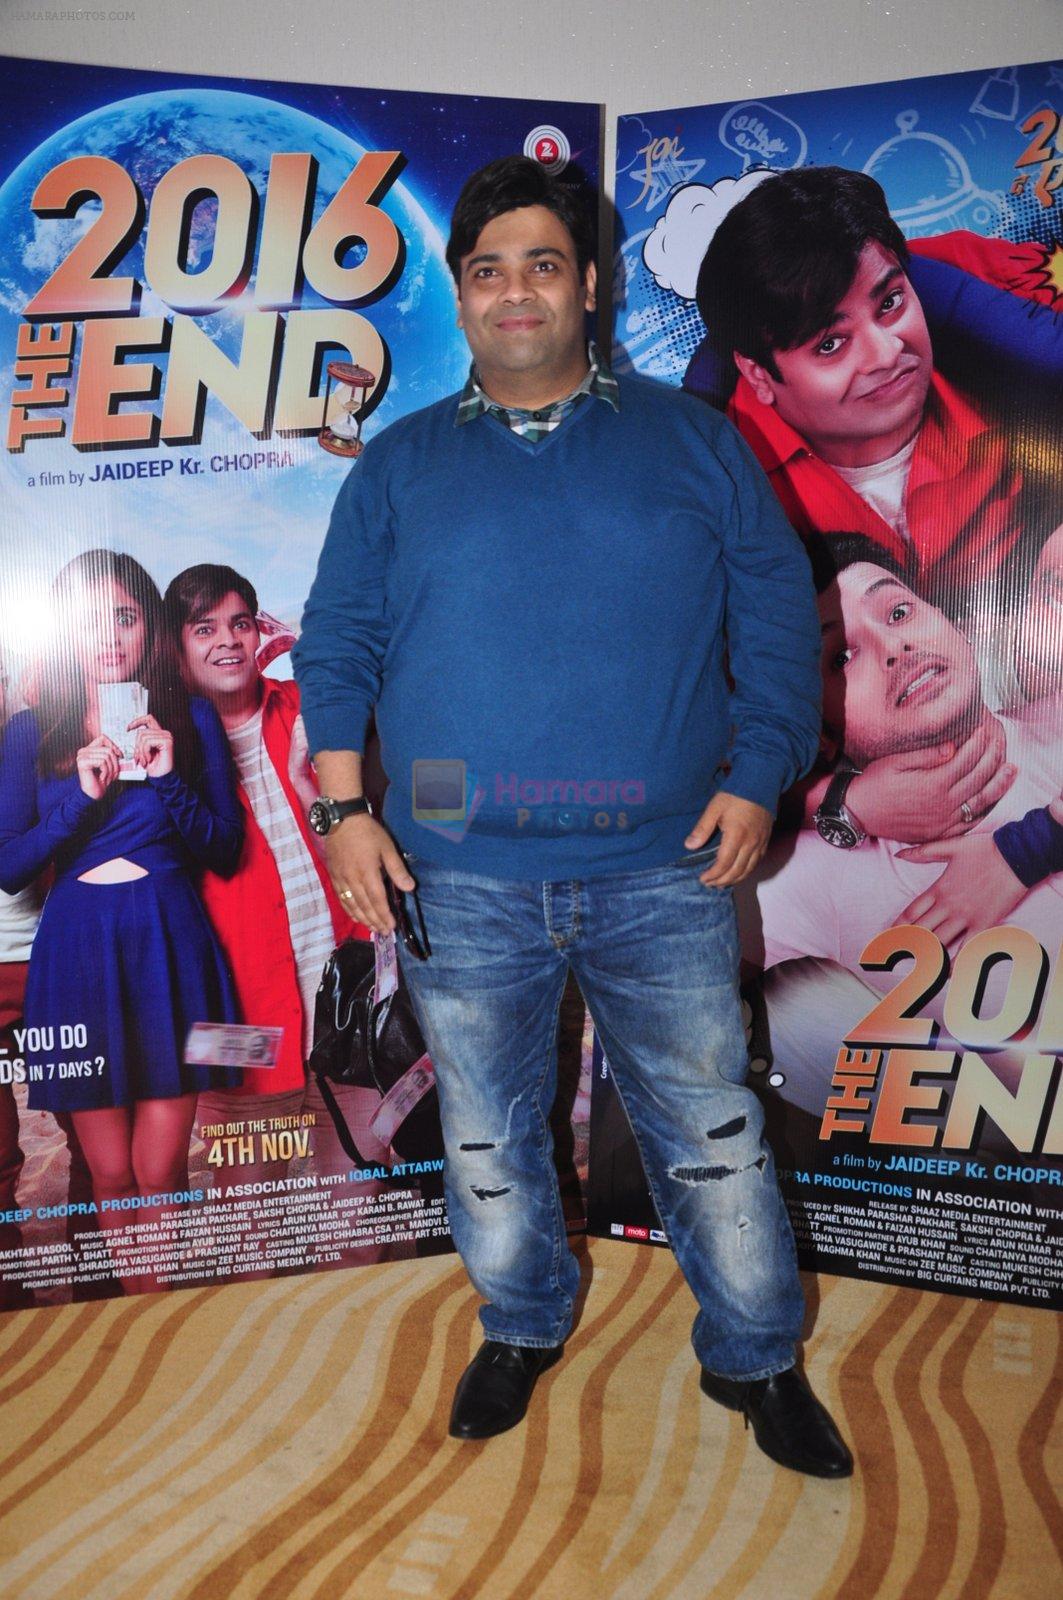 Kiku Sharda at the Trailer launch of film 2016 The End on 6th Oct 2016